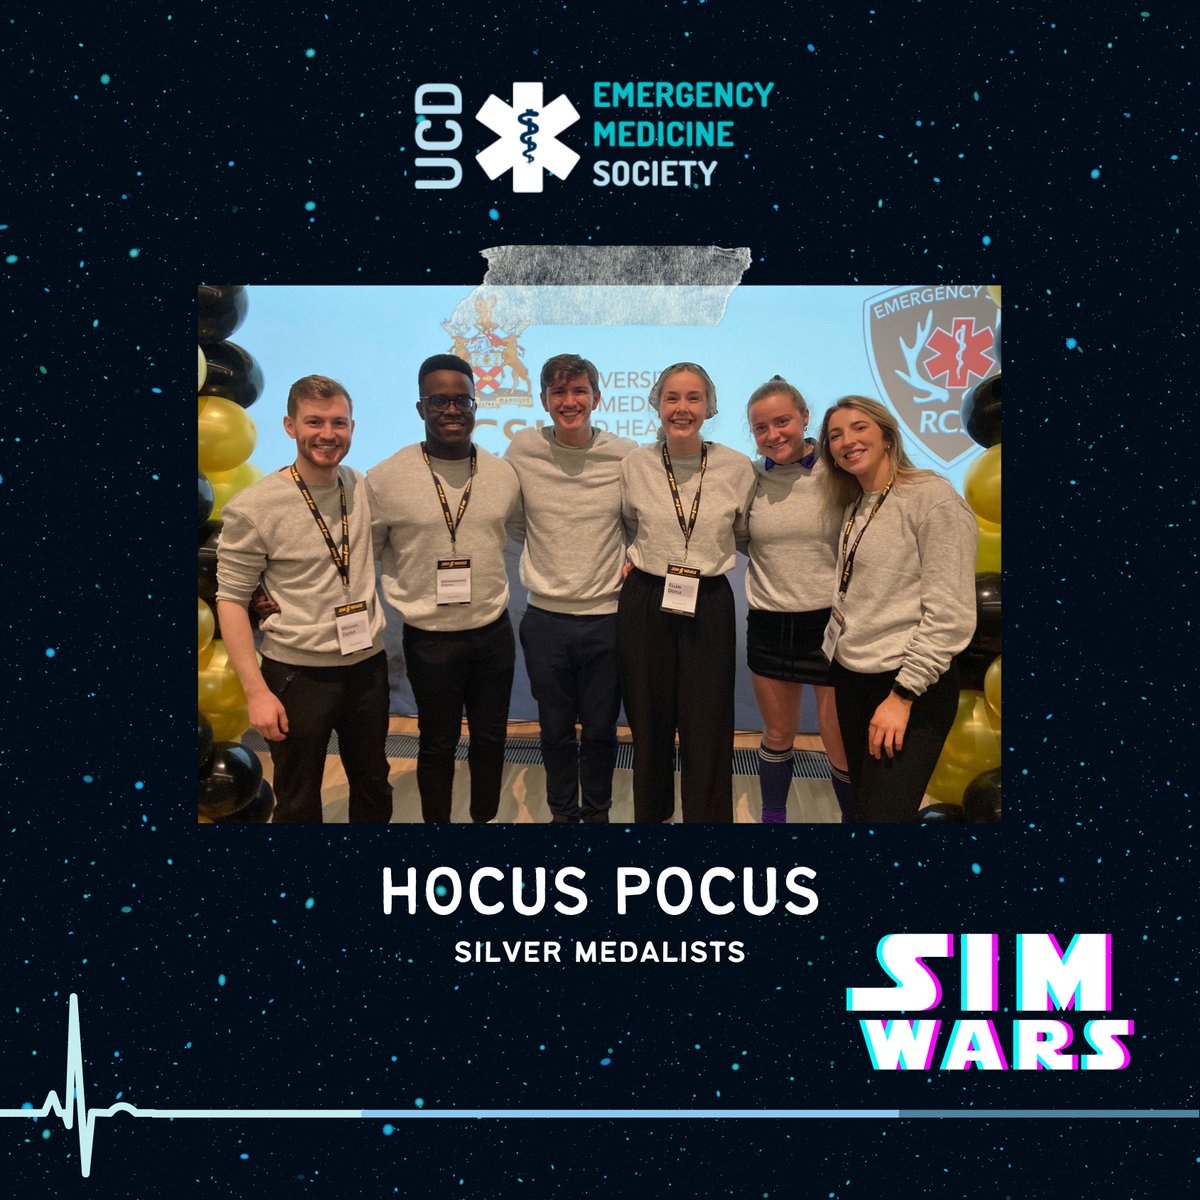 Congratulations to our SimWars teams for their stellar performance at this years inter-varsity emergency simulation competition! All three of our teams made it to the semi-finals and we couldn't be more proud! Big thank you to all the doctors for their help training UCD's teams!